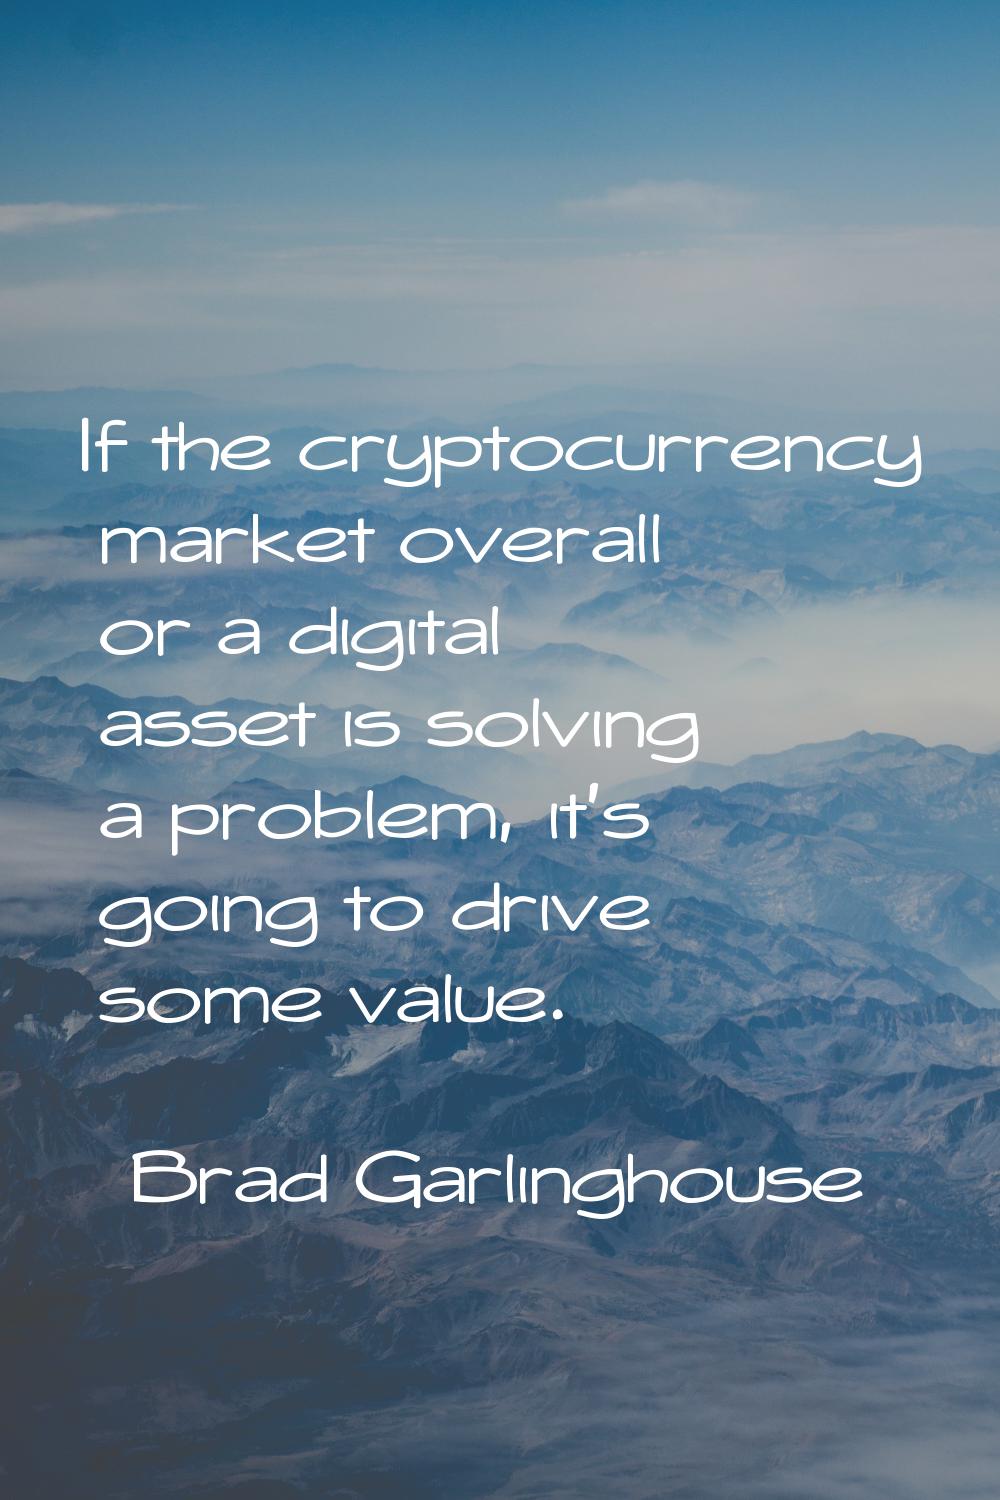 If the cryptocurrency market overall or a digital asset is solving a problem, it's going to drive s